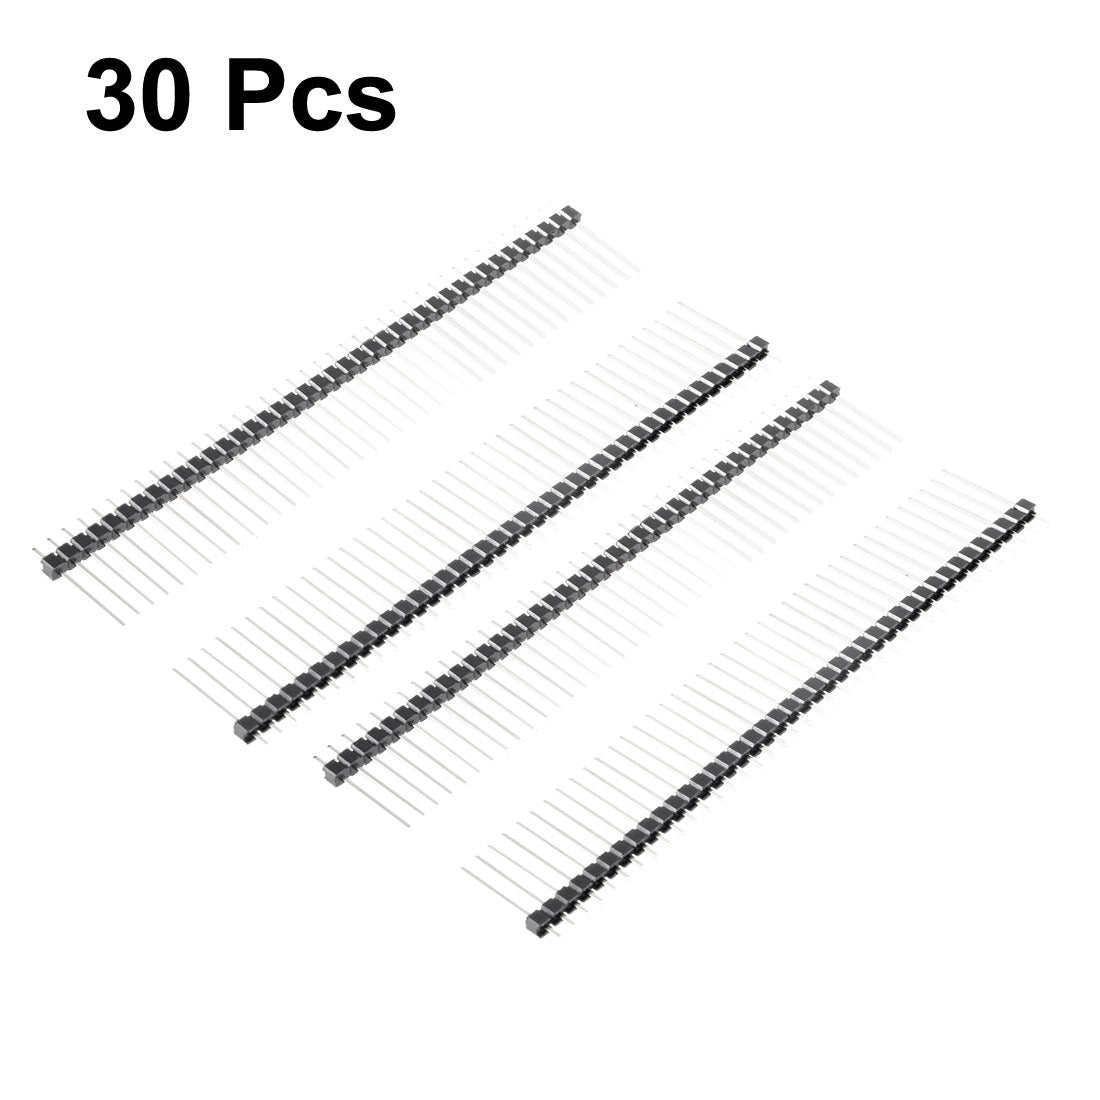 uxcell Uxcell 30Pcs 2.54mm Pitch 40-Pin 16mm Length Single Row Straight Connector Pin Header Strip for Arduino Prototype Shield